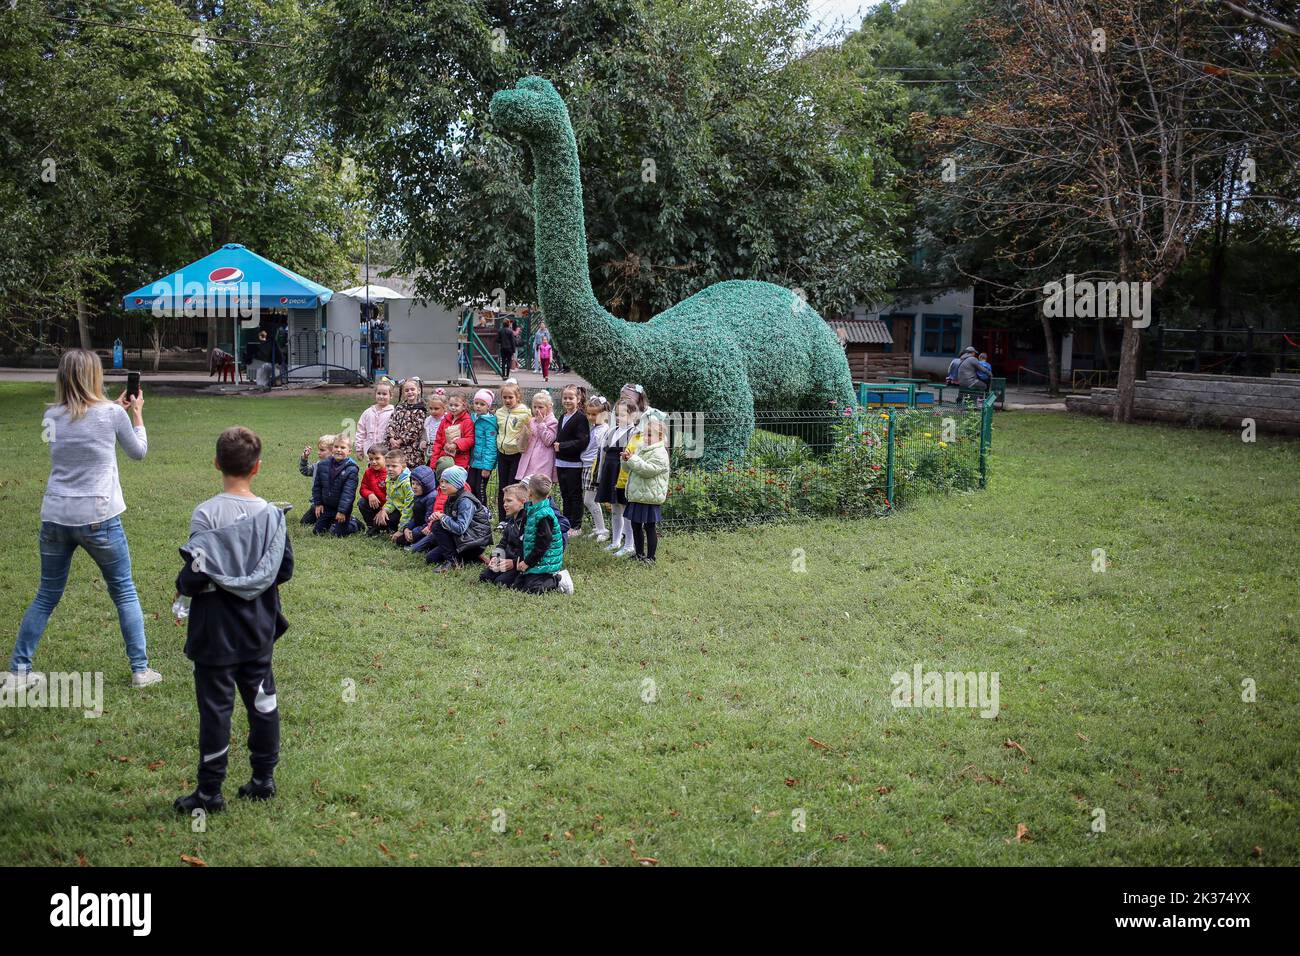 Children are seen taking pictures near the dinosaur figure. One of the oldest in Ukraine, the Odessa Zoo was established in September 1922 In honor of the centenary of the zoo, solemn events were held:1.? memorial plaque was opened to its first director Heinrich Beizert. 2.Ukrposhta issued a special envelope and a stamp. The circulation is limited, only 200 pieces. Stamp cancellation was carried out right at the zoo. 3.Together with the Odessa mayor Gennady Trukhanov, the director of the zoo, Igor Belyakov, opened a new lion cub.In April, a pair of white lions from the Feldman Ecopark in Khark Stock Photo